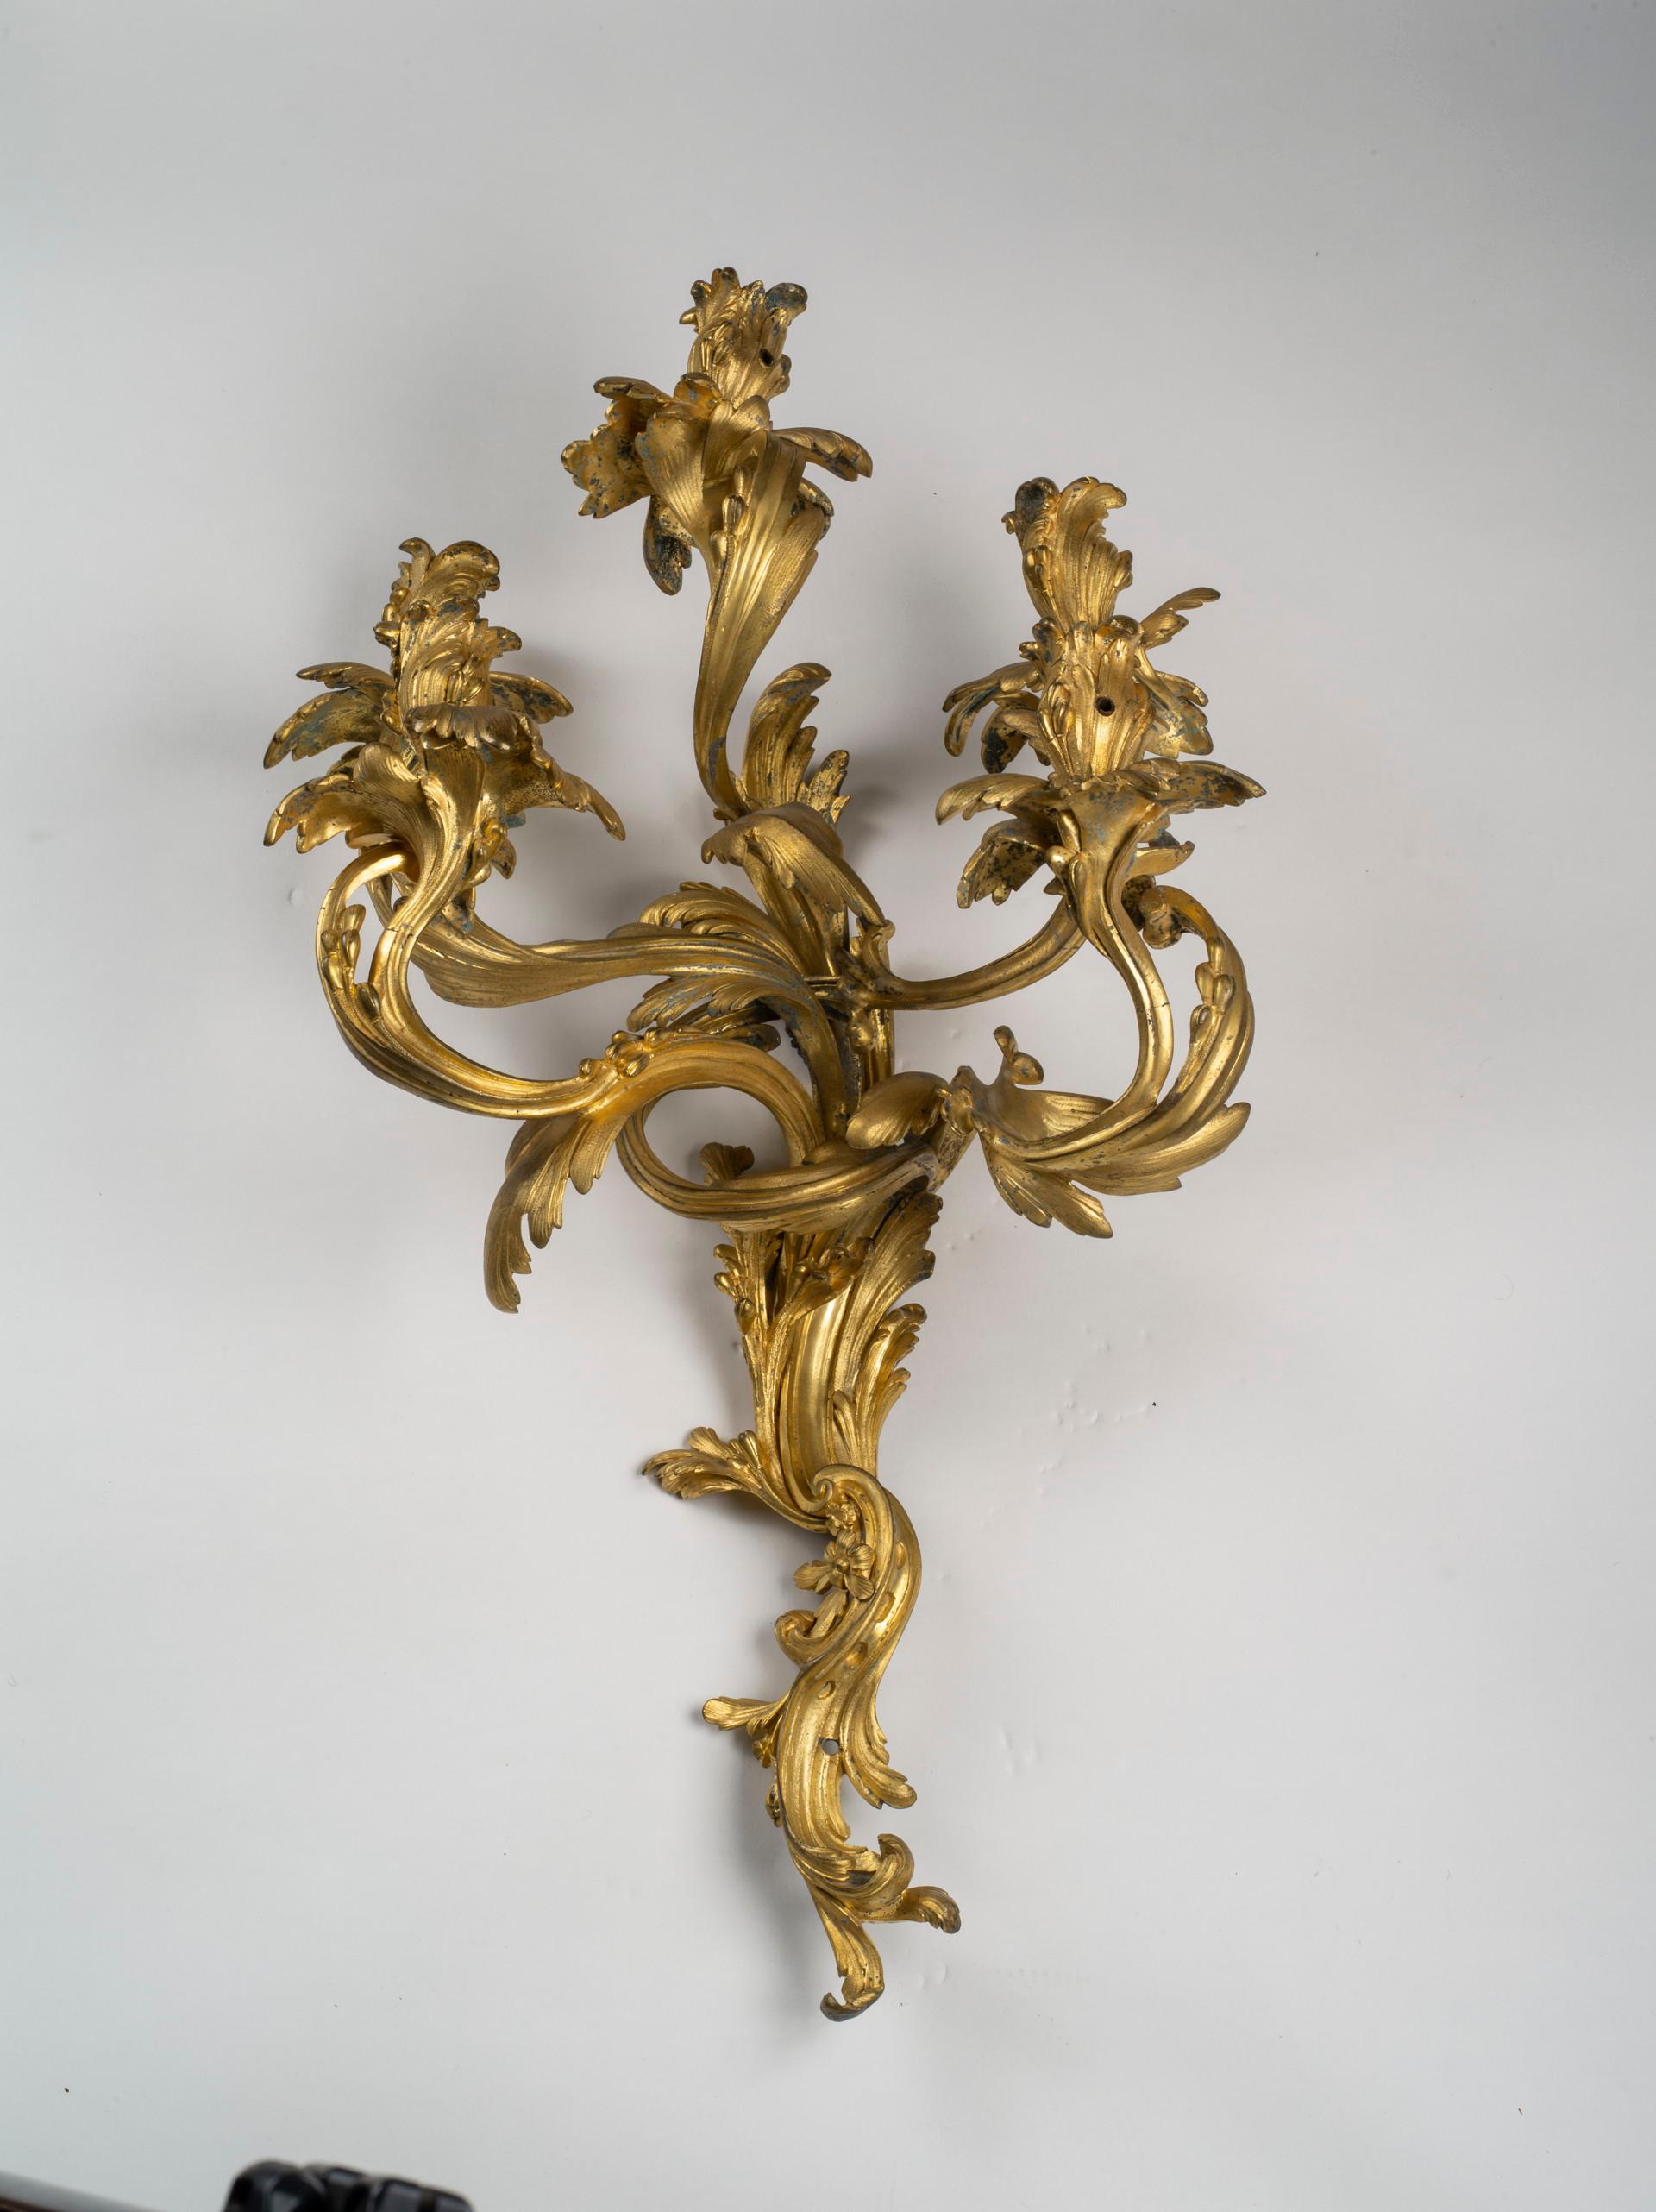 Each sconce of asymmetrical rocaille design with foliate-cast backplate issuing five foliate S and C- scrolling candle arms mounted throughout with stylized leaf-tip motifs. Drilled for electricity.
These magnificent wall lights (or scones) achieve